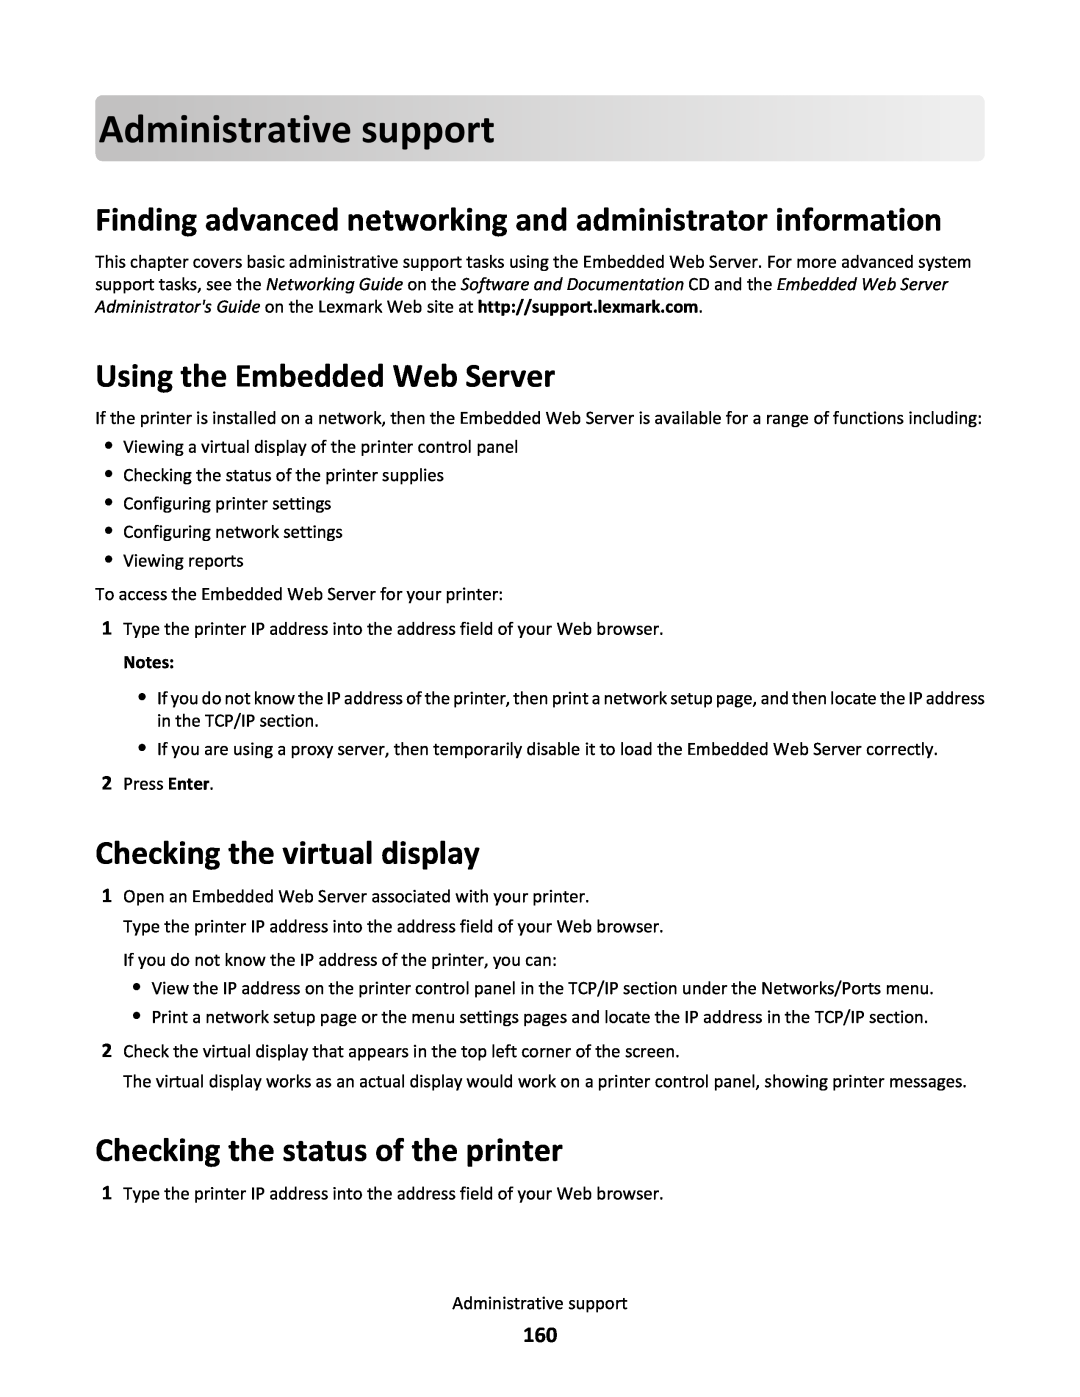 Lexmark C790 manual Adminis trativesupport, Finding advanced networking and administrator information 